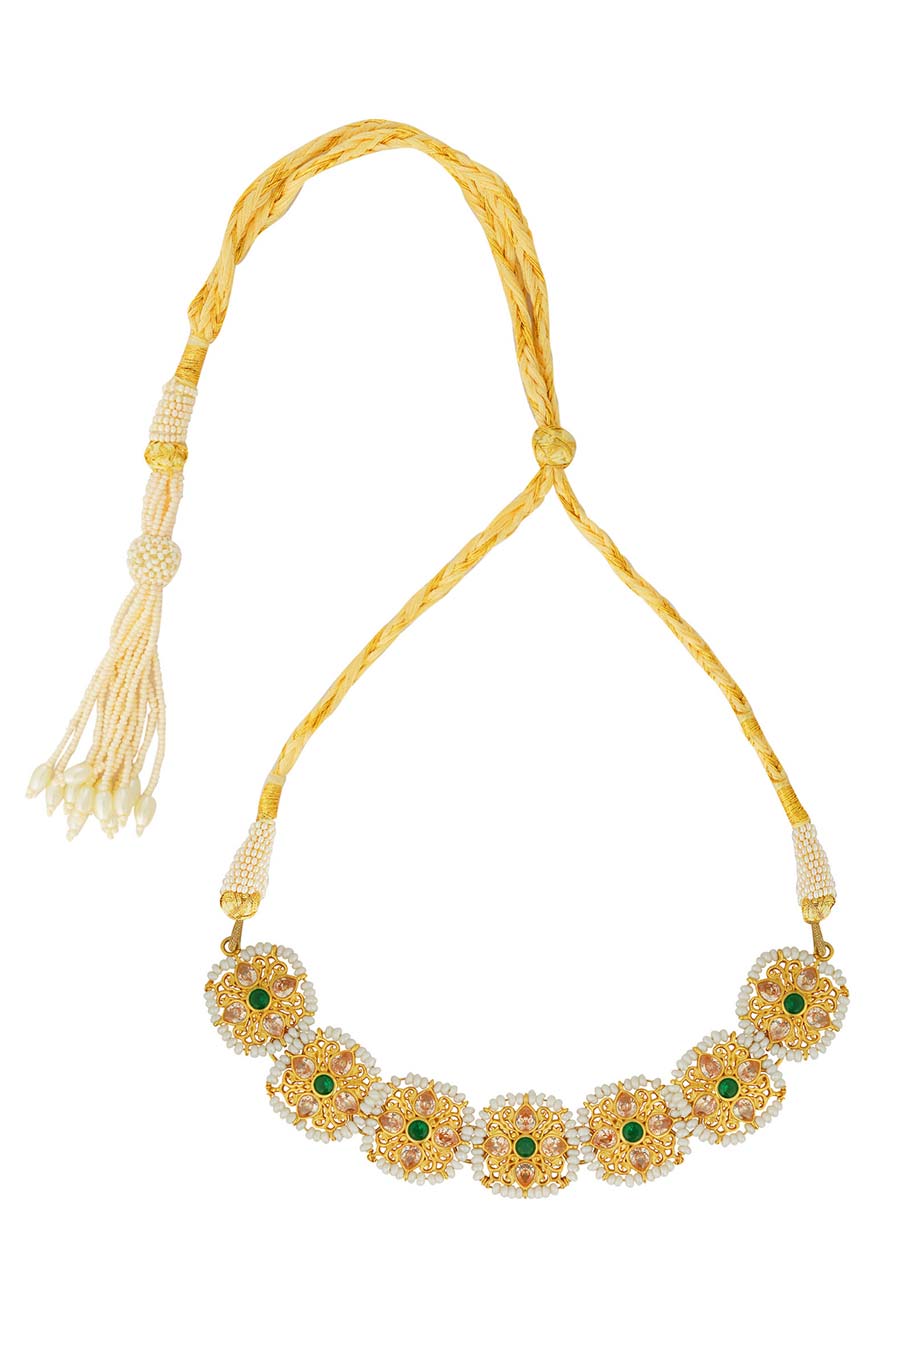 Begum Gold Plated Choker Necklace